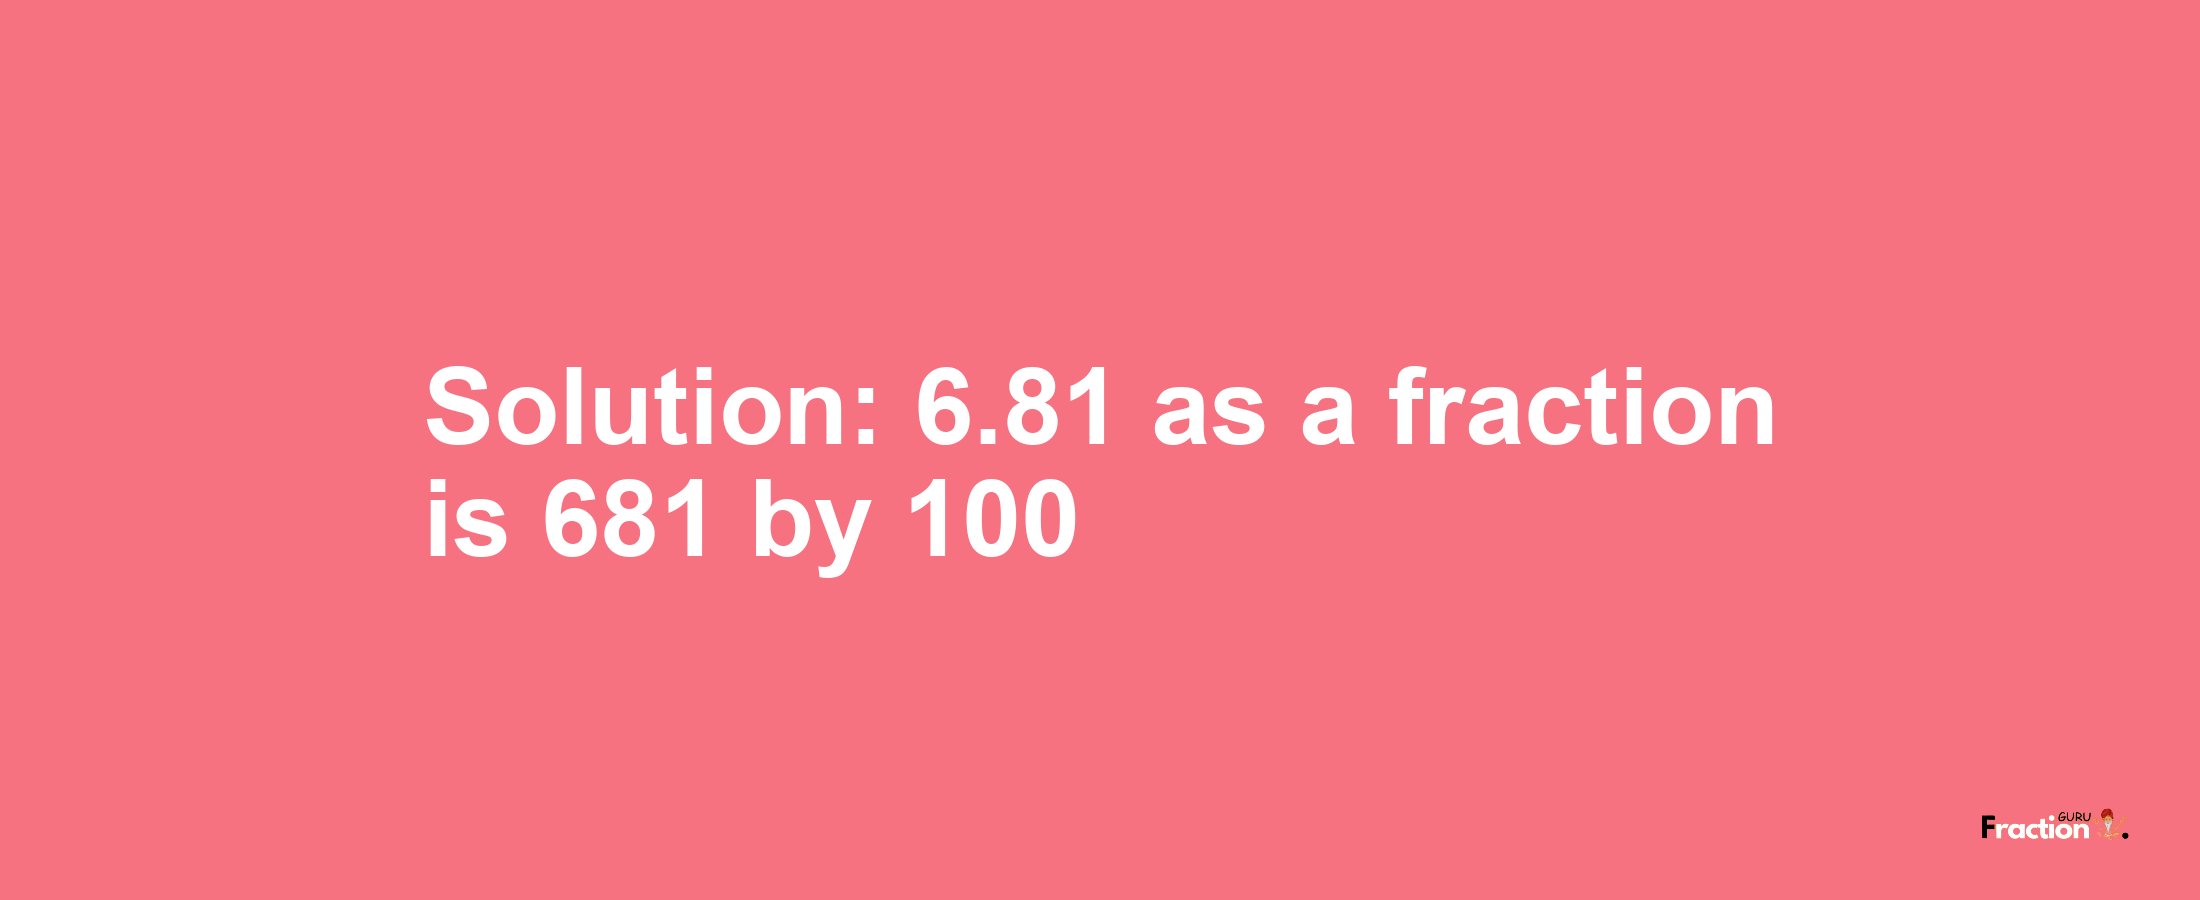 Solution:6.81 as a fraction is 681/100